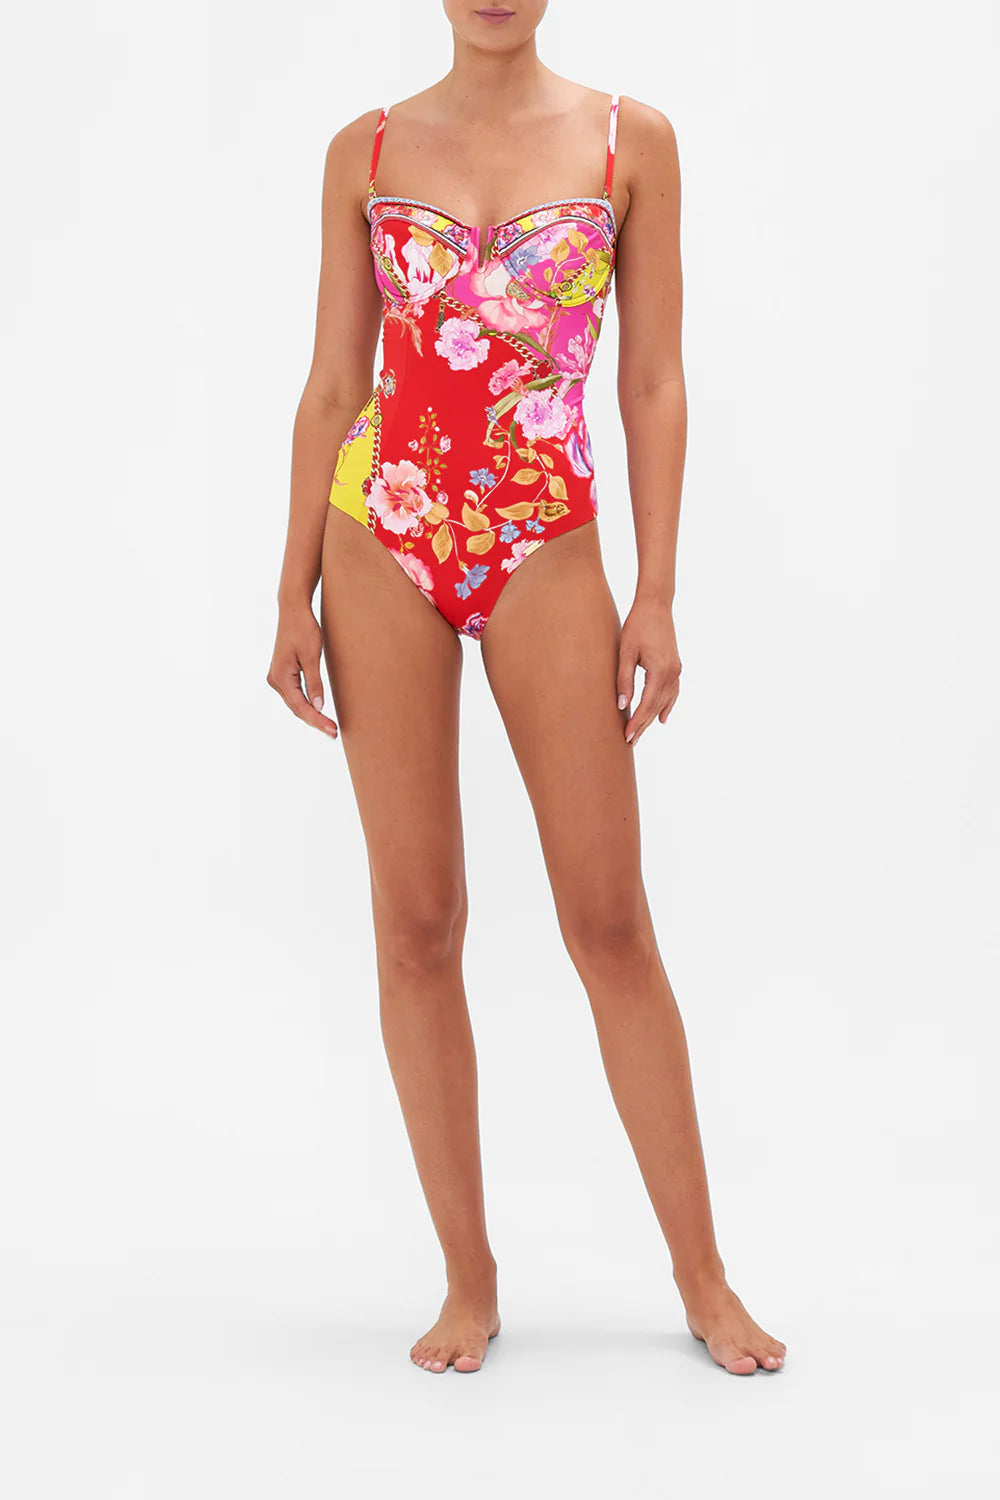 Camilla The Beetles Underwire One Piece